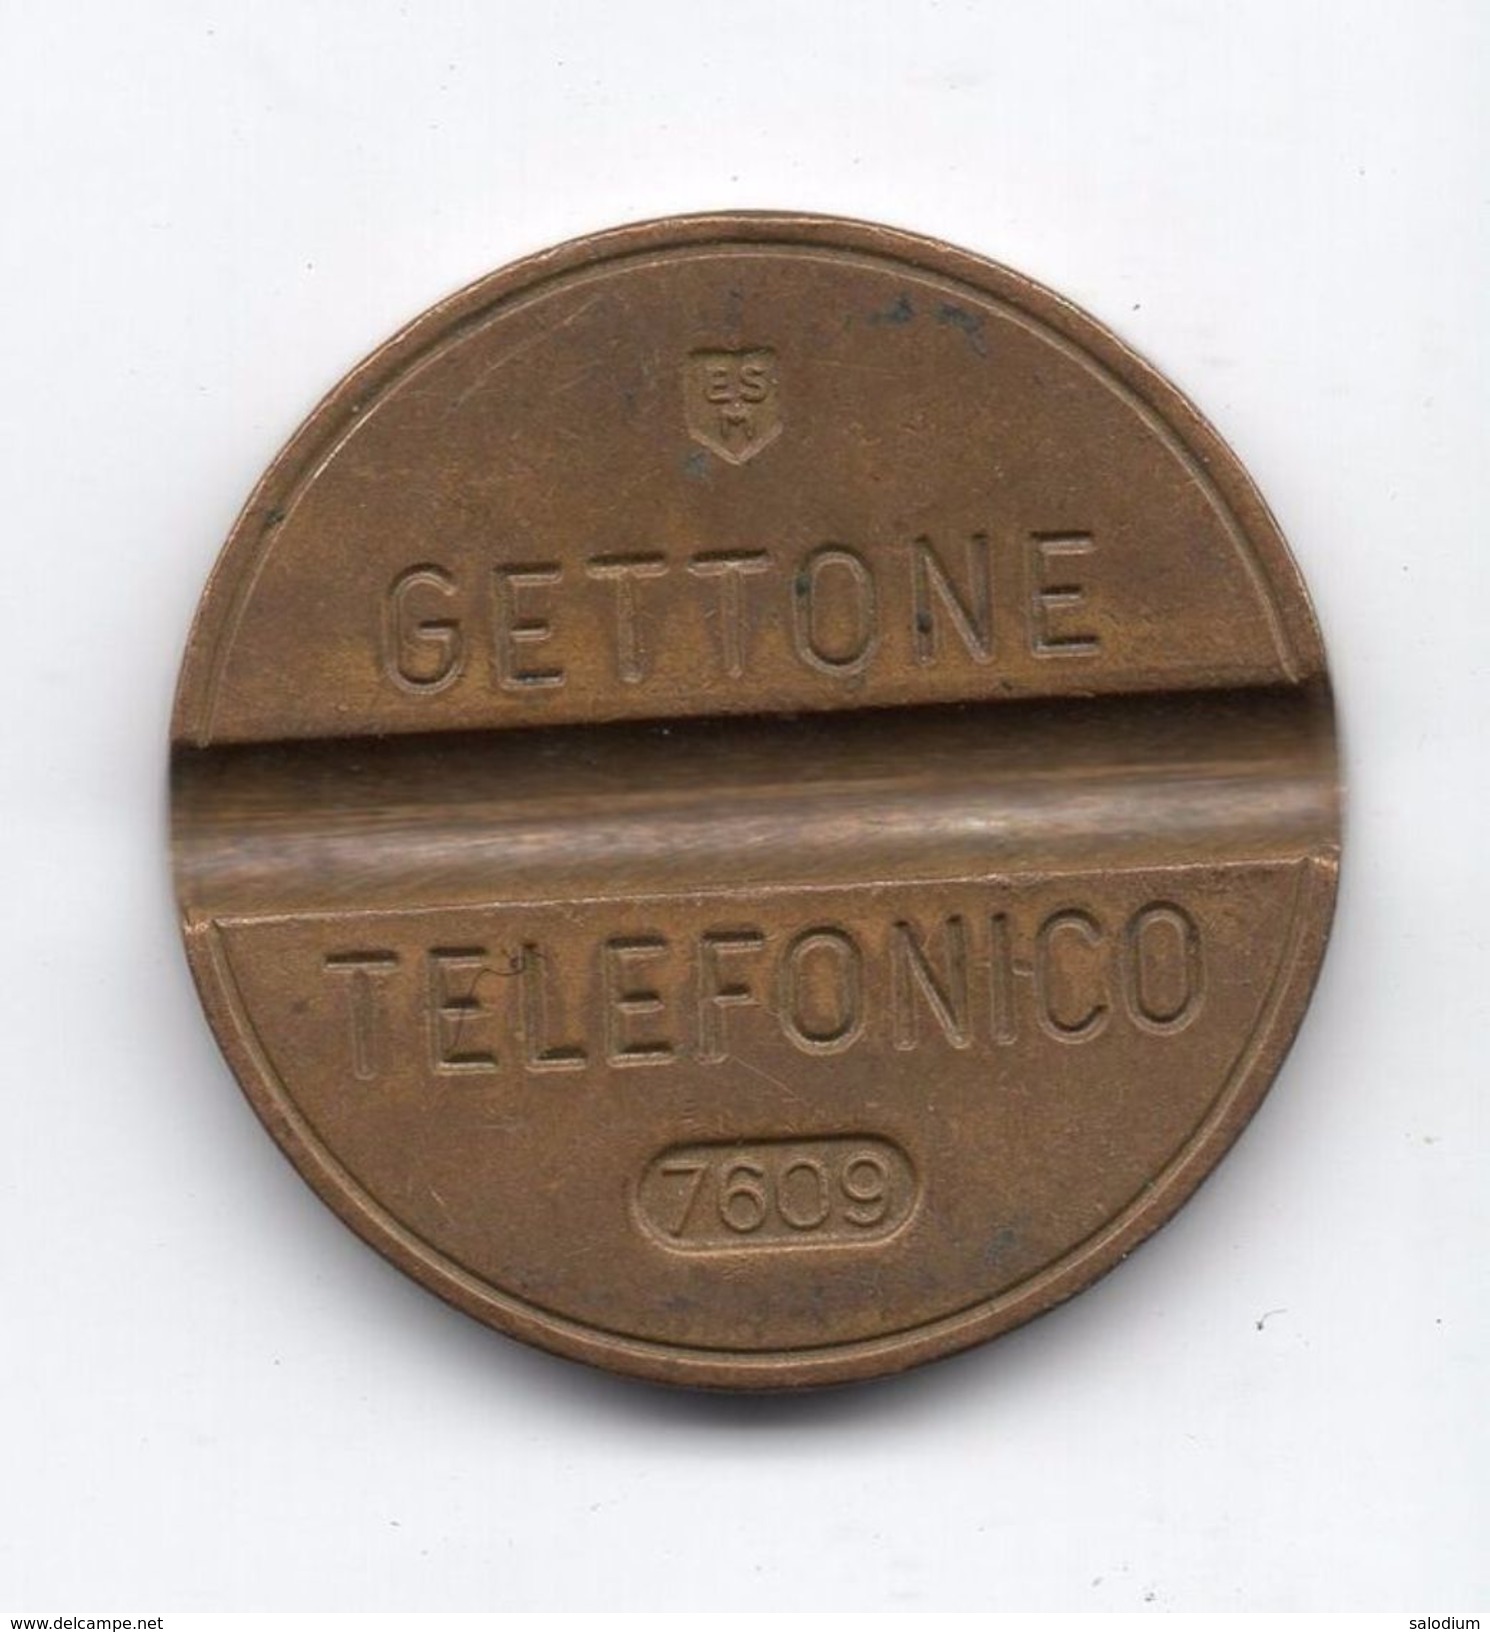 Gettone Telefonico 7609 Token Telephone - (Id-805) - Professionals/Firms